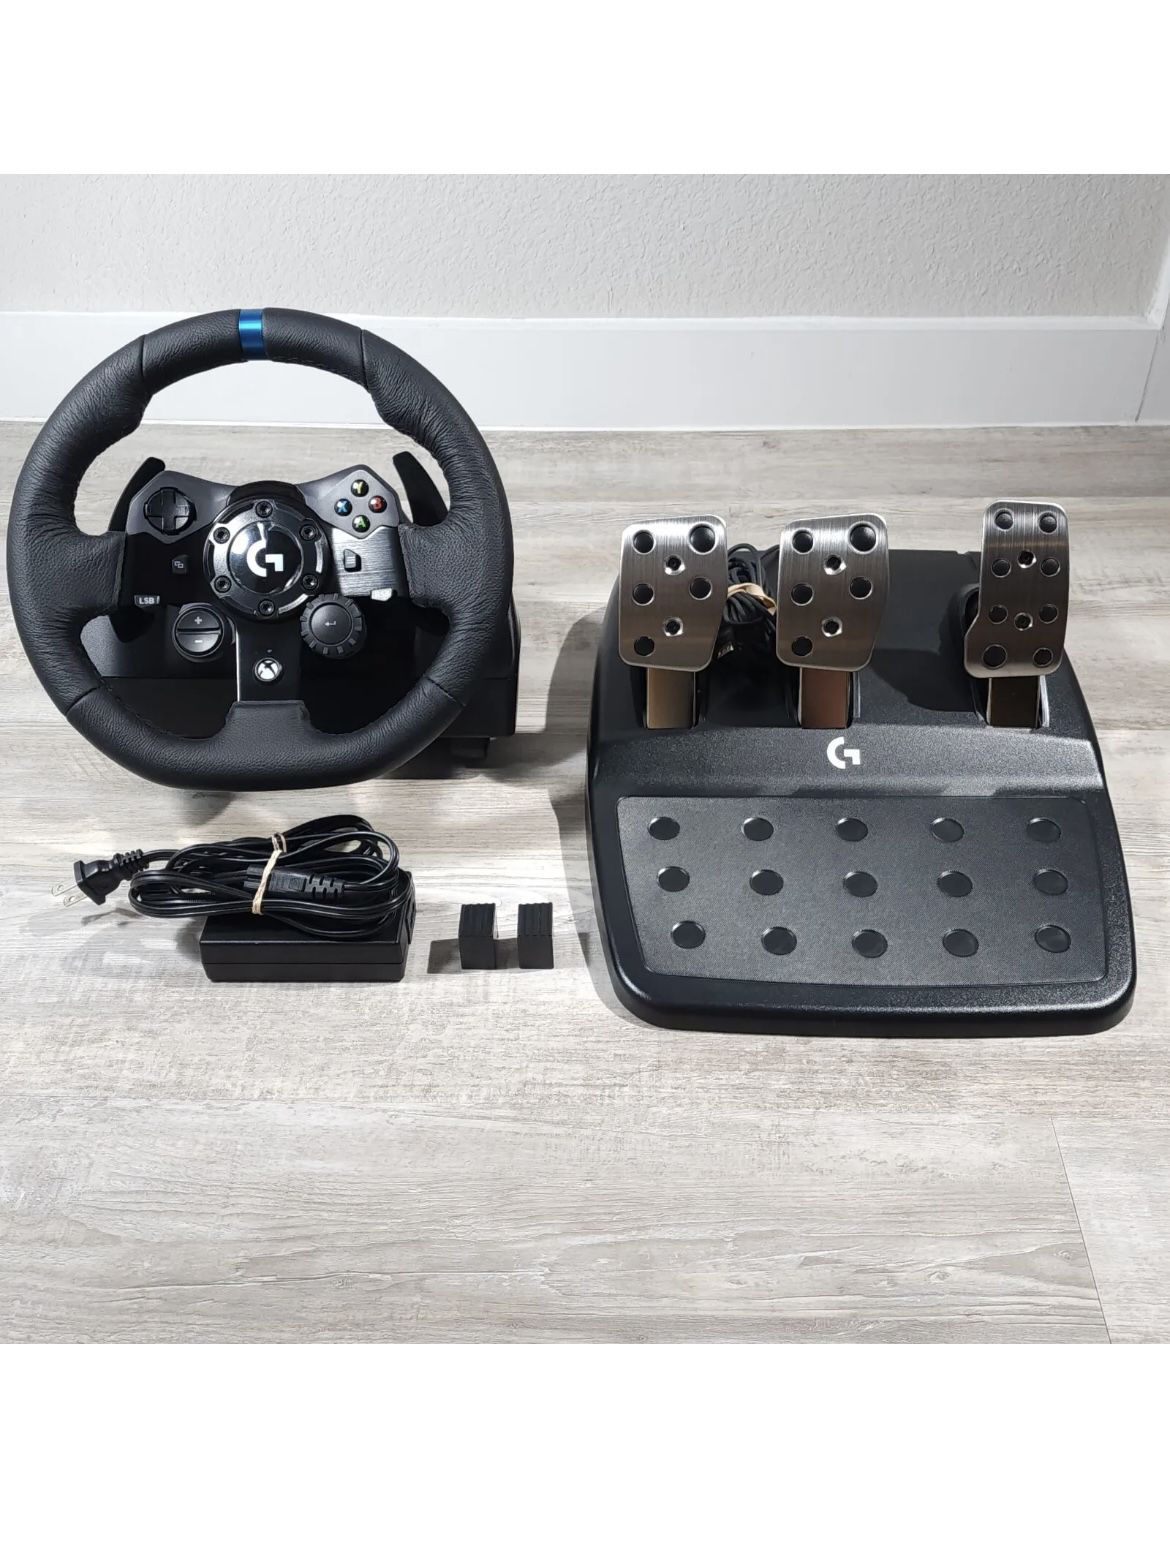 Logitech G920 Driving Force Wheel and Pedals for Xbox Series, Xbox One and PC